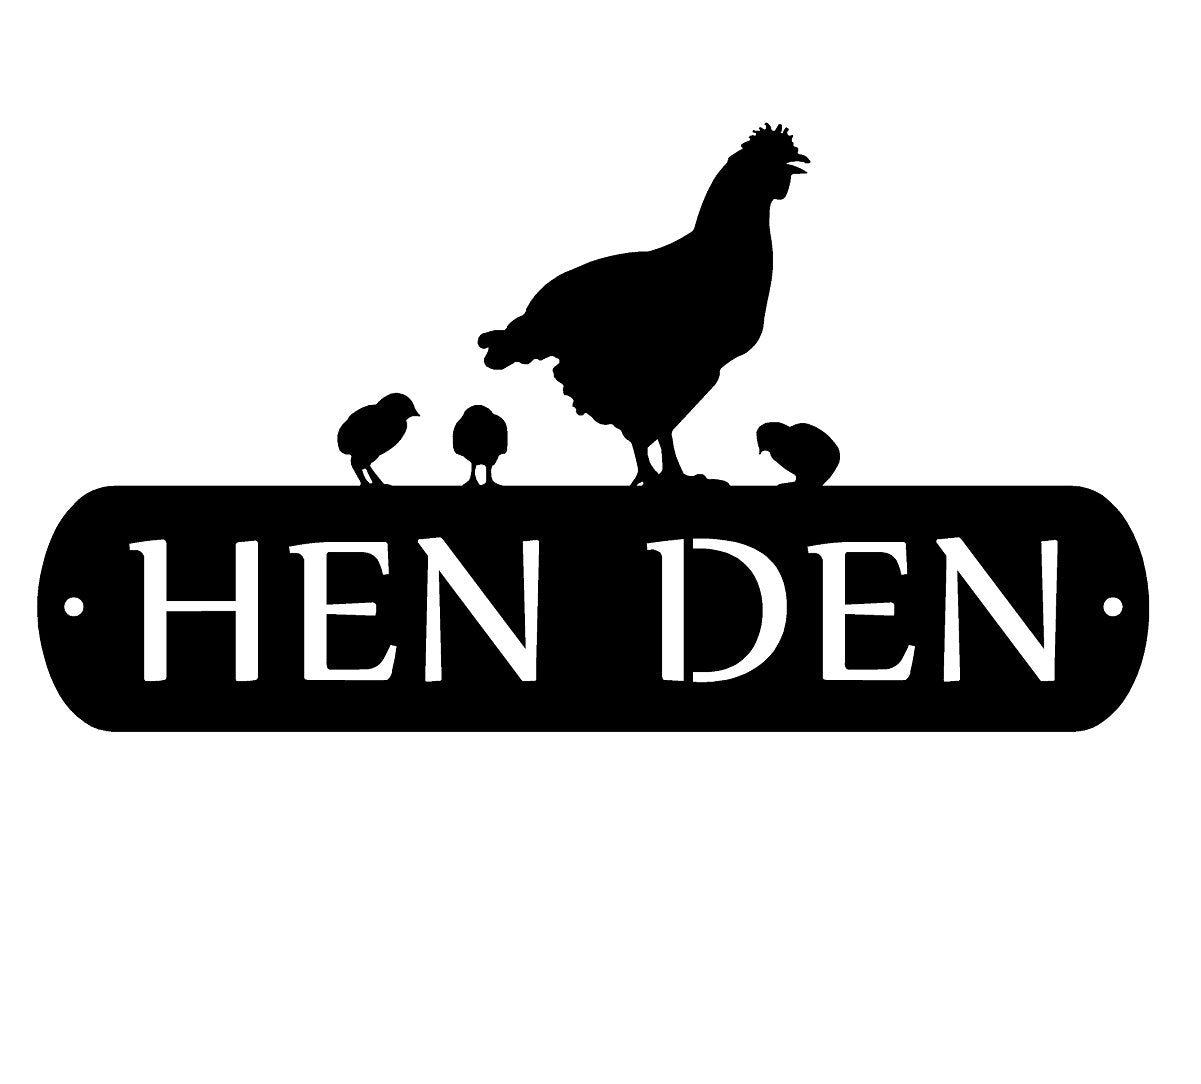 HEN DEN Chicken Theme Metal Sign #1 - The Metal Peddler Signs & Sayings Chicken Coop Signs, chickens, farm, not-dog, rooster